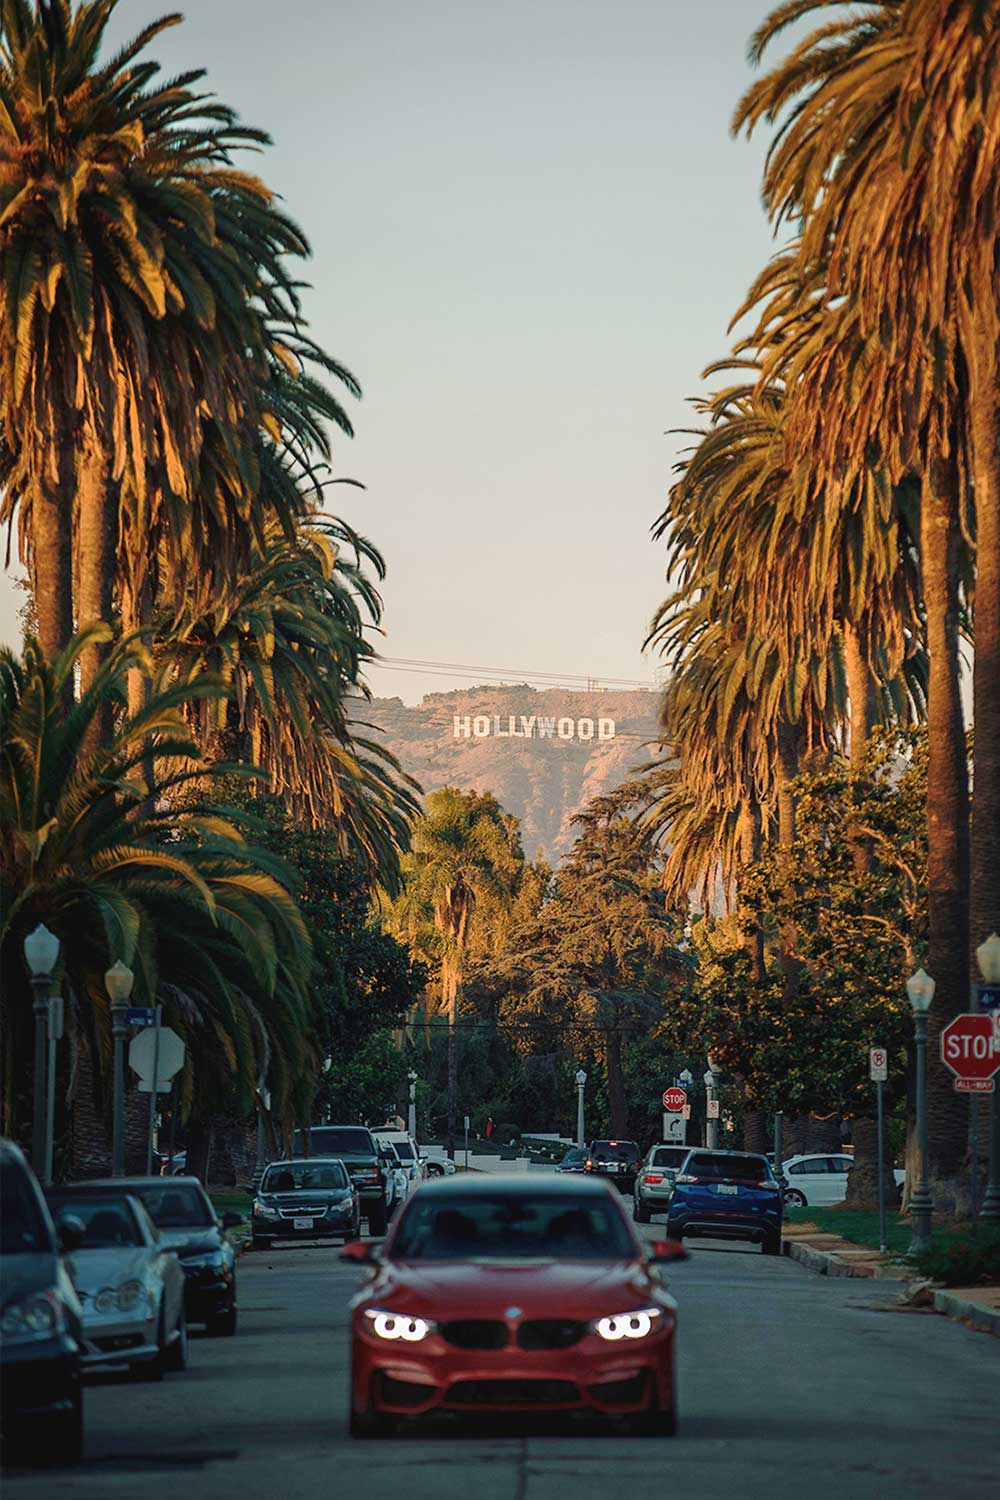 hollywood-sign-photo-spot-between-palm-trees